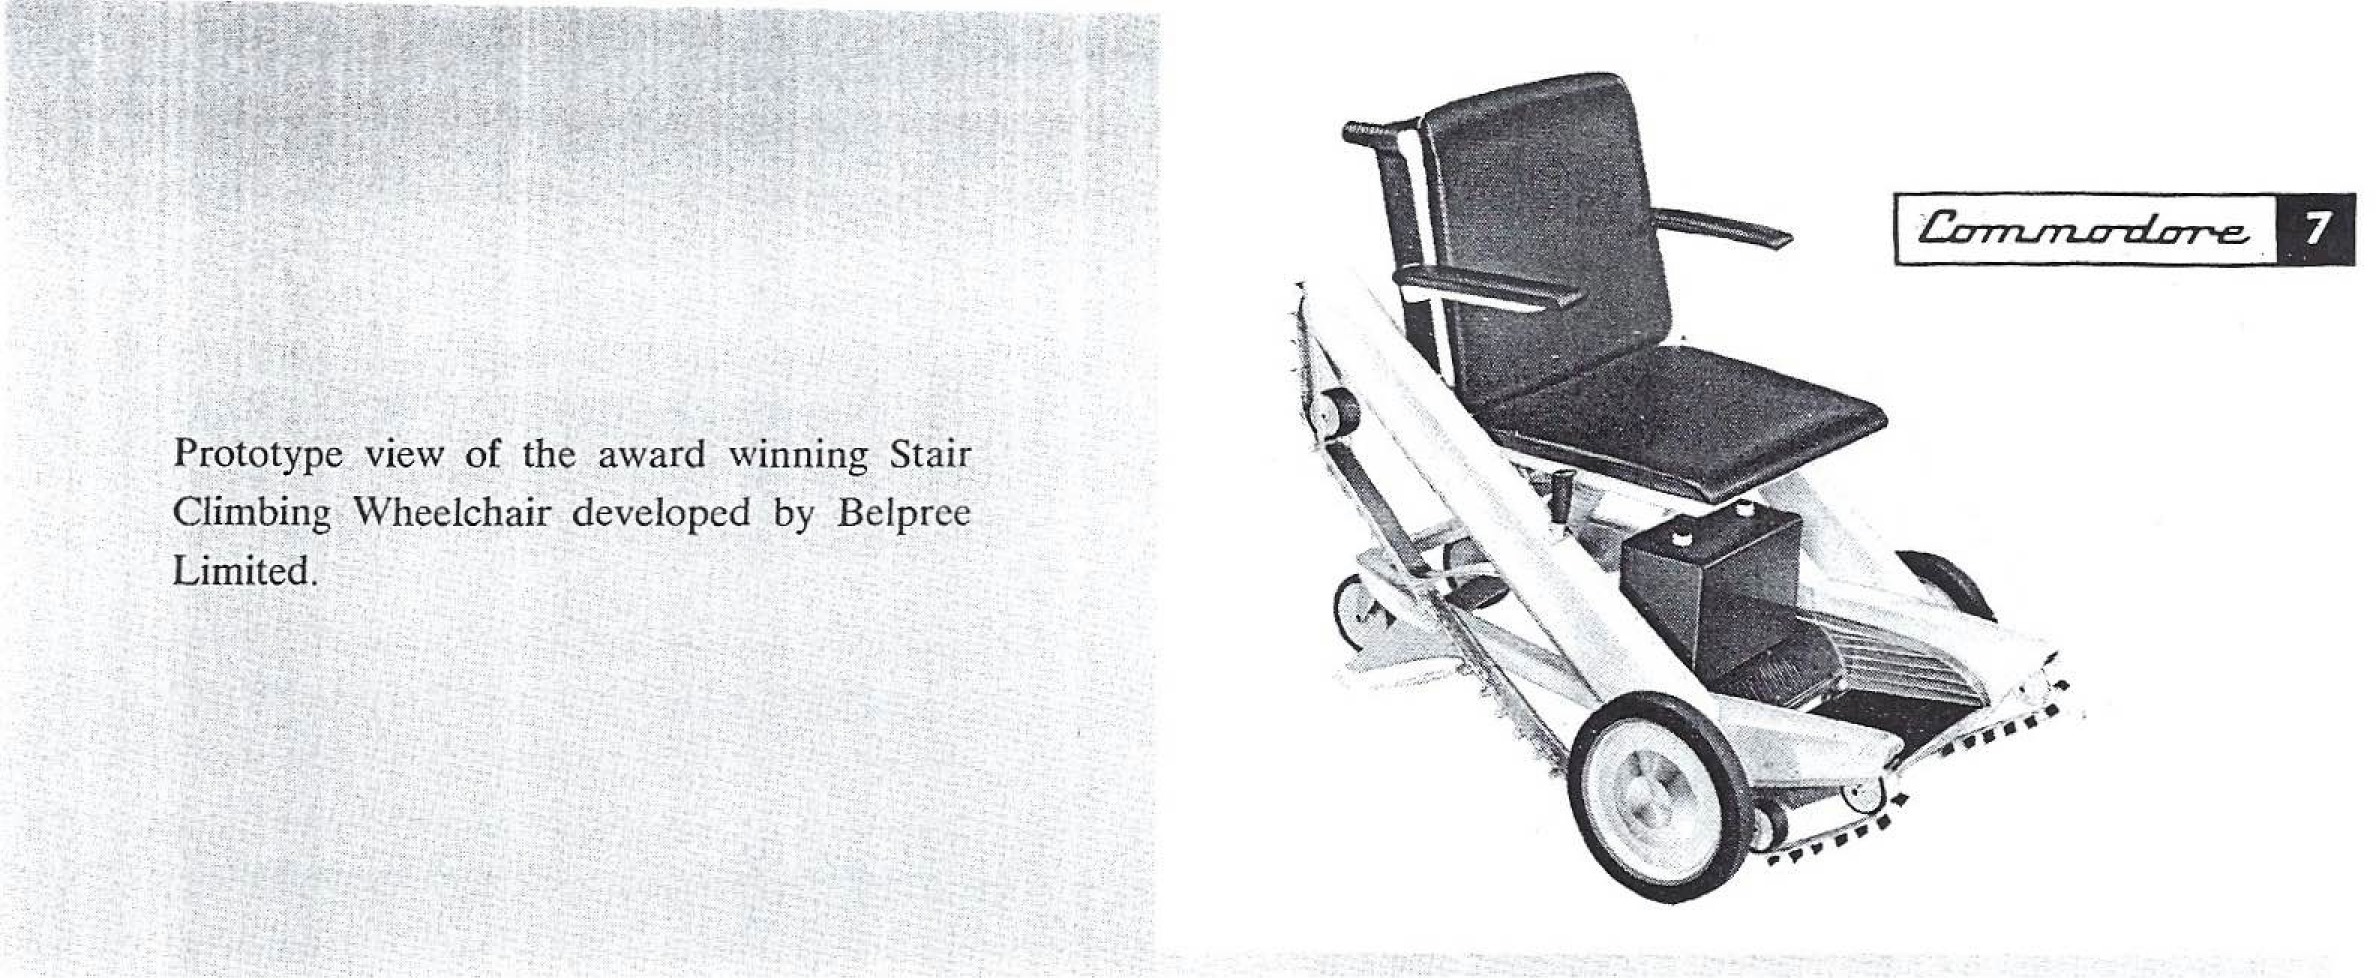 Prototype view of the stair-climbing wheelchair